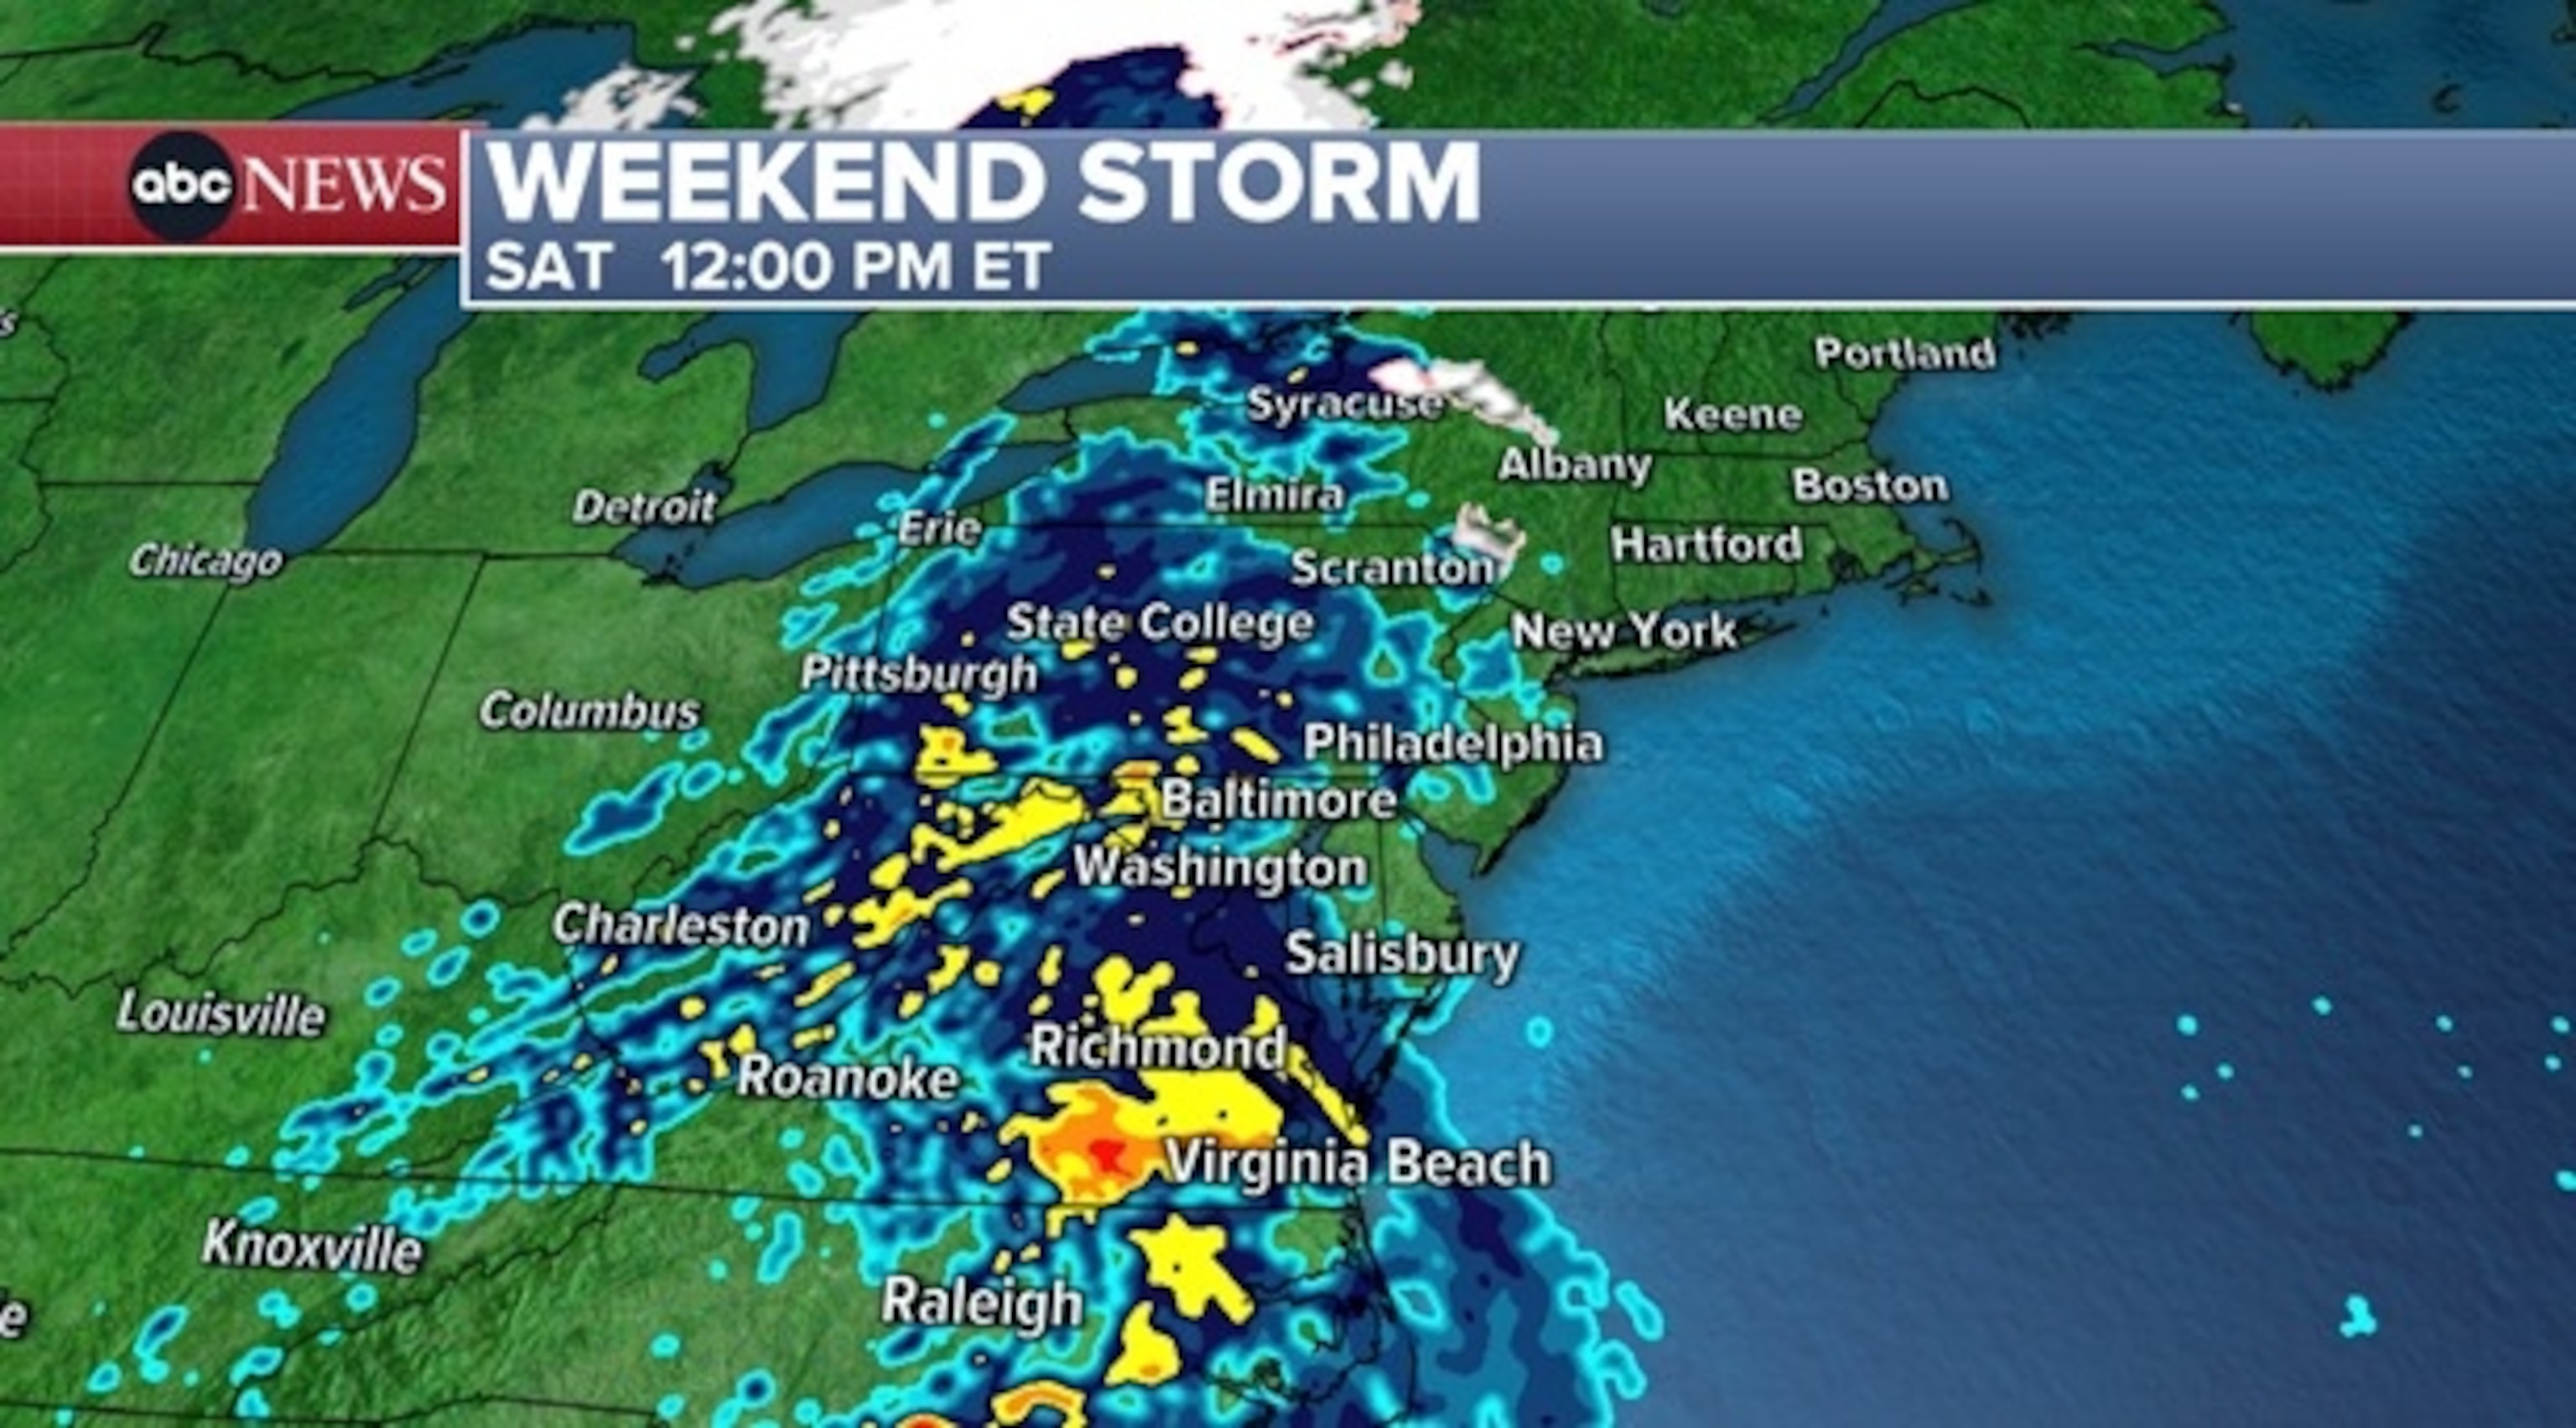 PHOTO: Weekend storm weather graphic